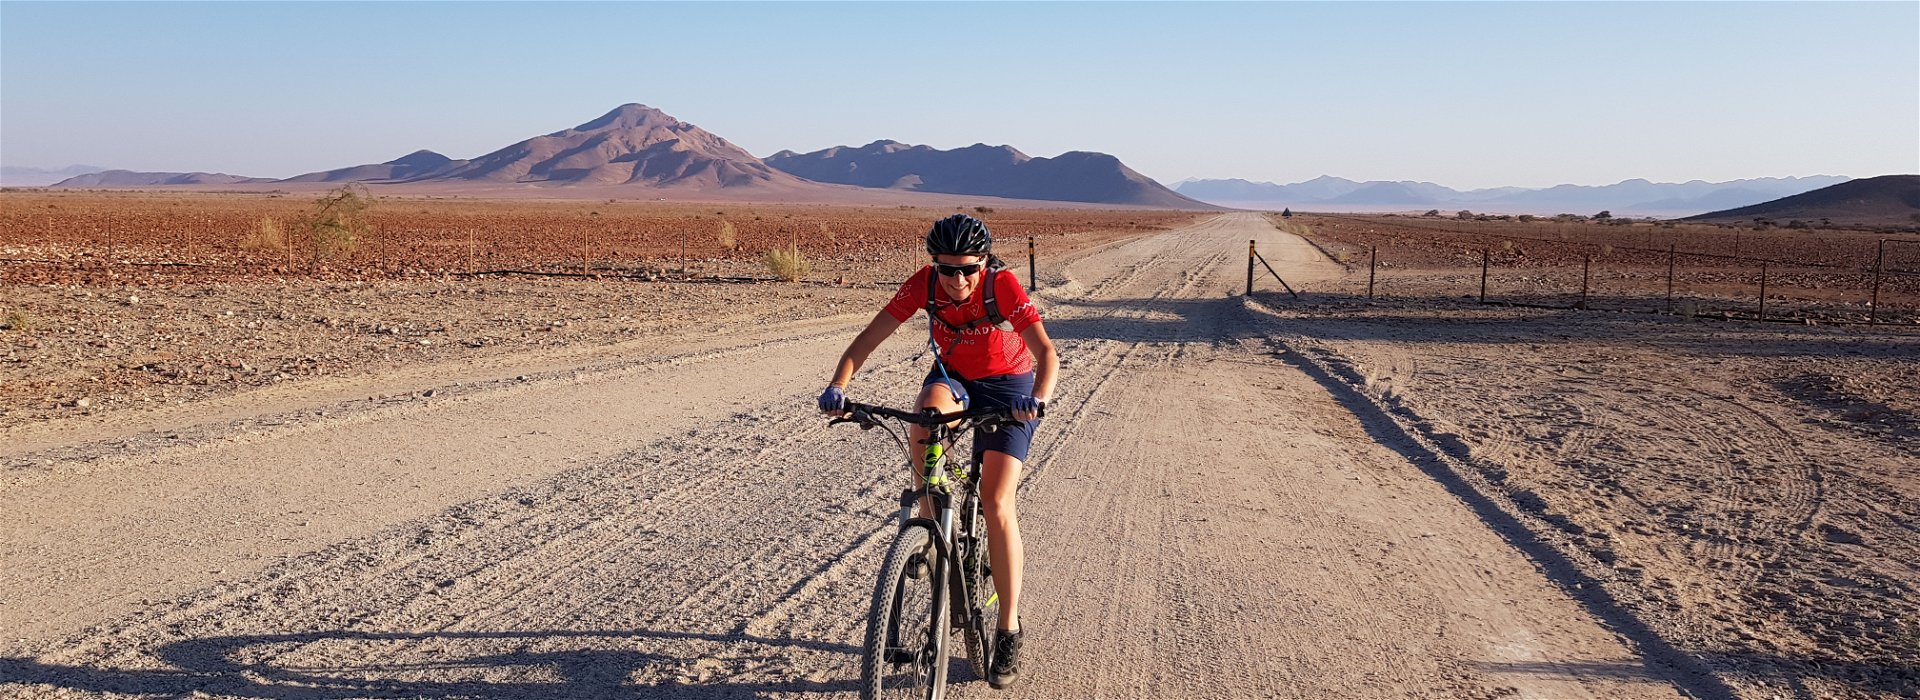 Victoria Falls to Cape Town: The Ultimate Africa Cycling Tour